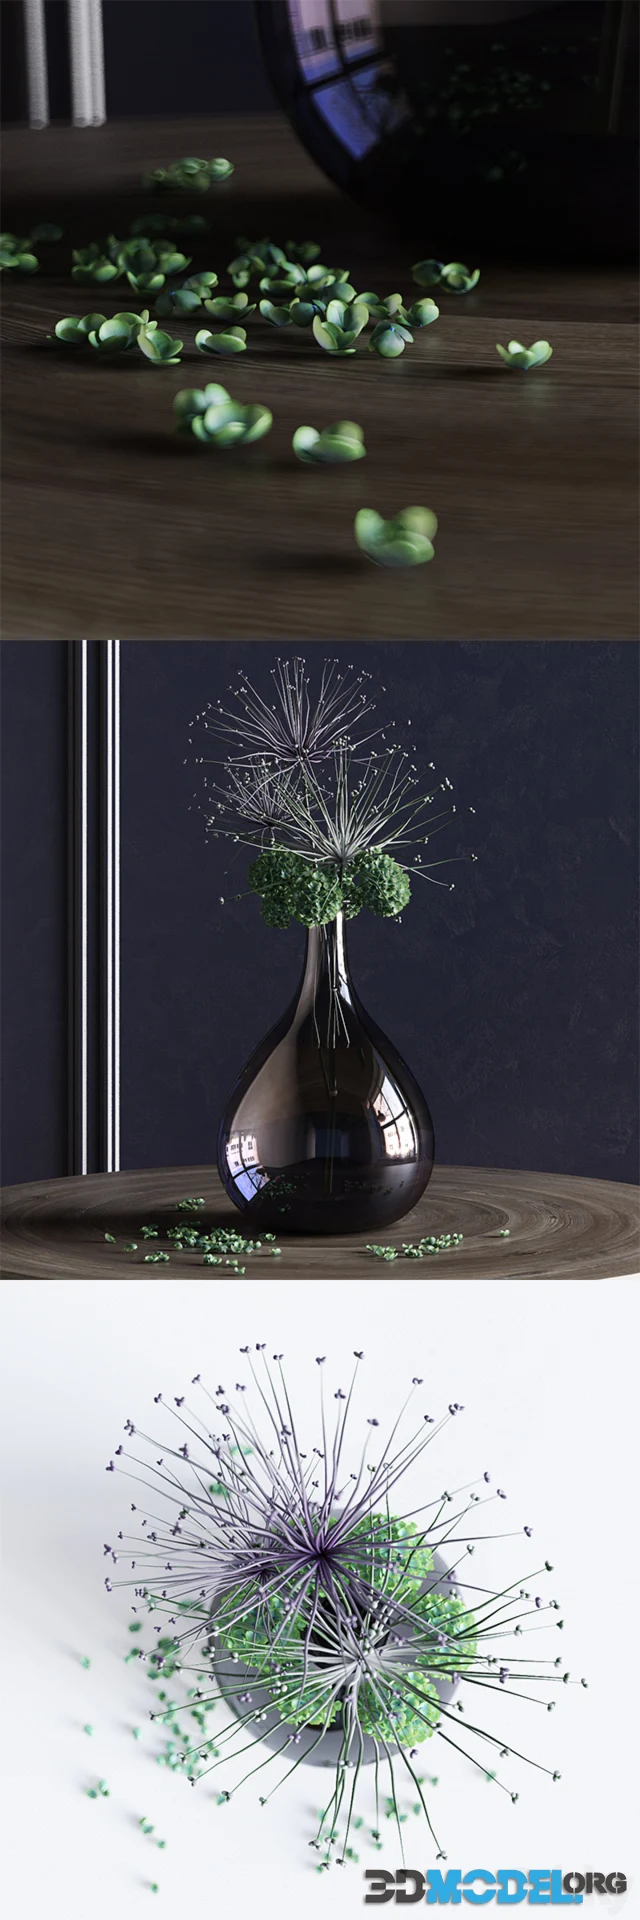 Flowers in a glass vase